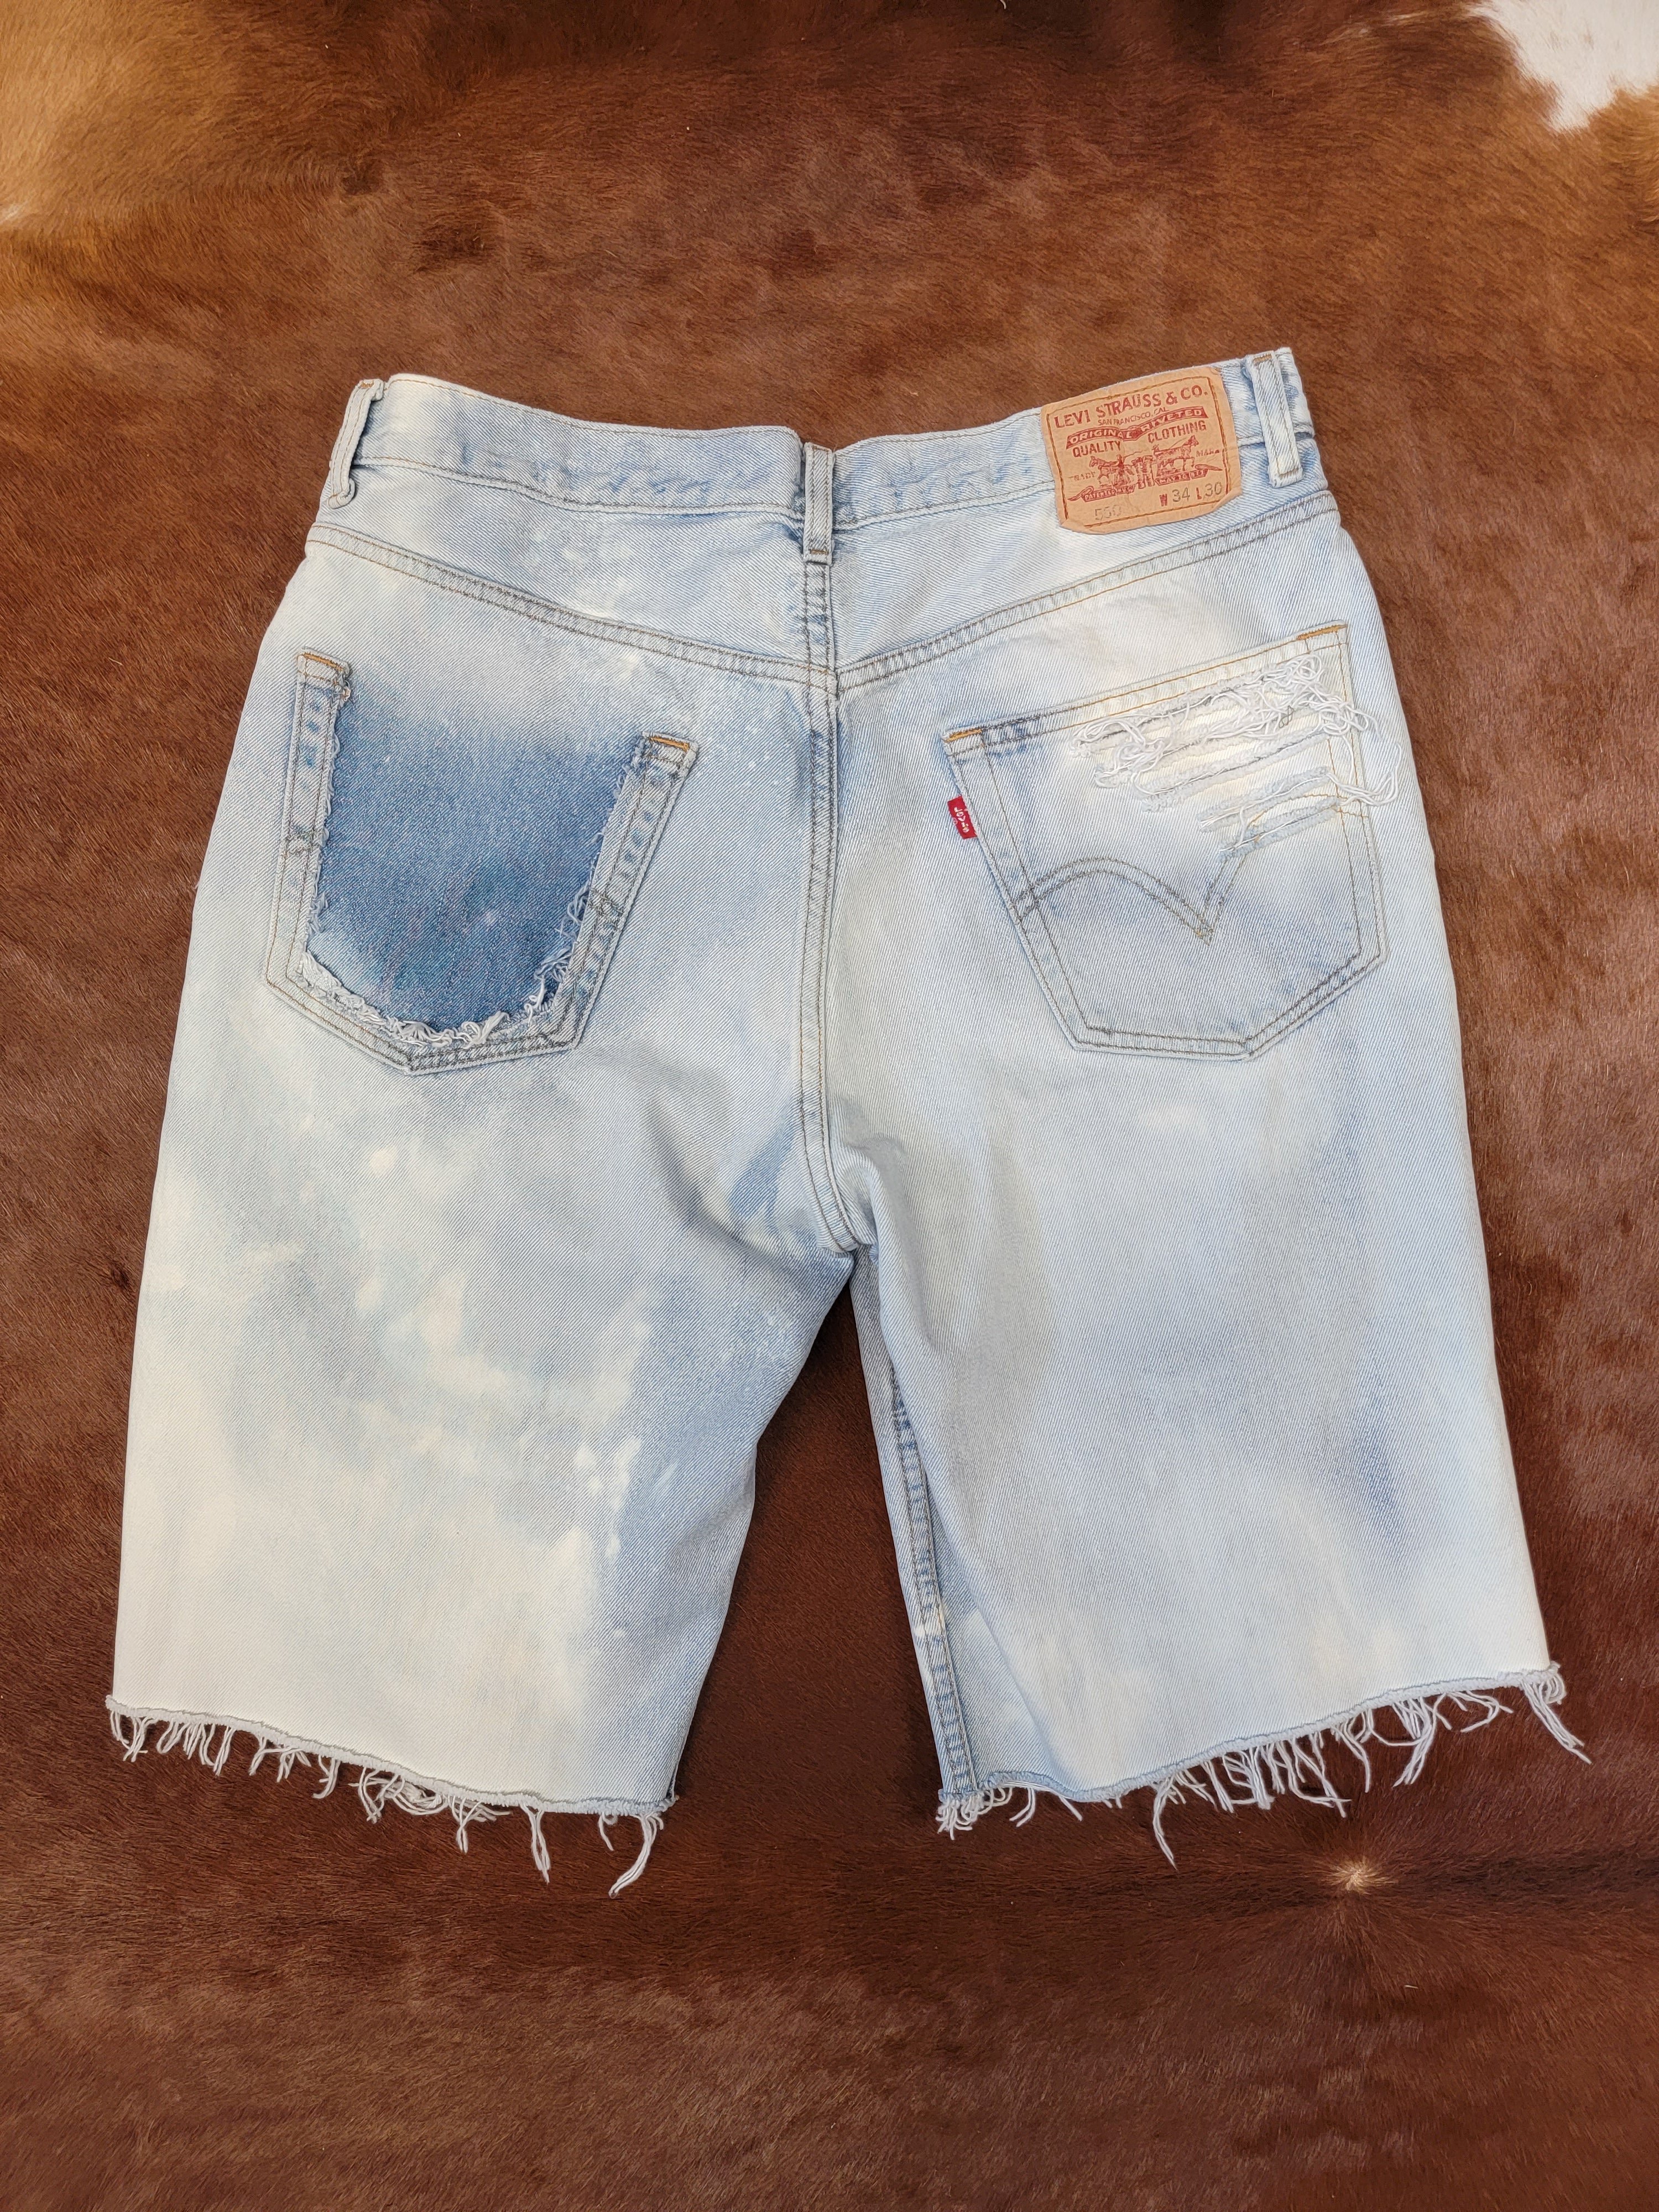 Levis 550 – Weathered Not Worn